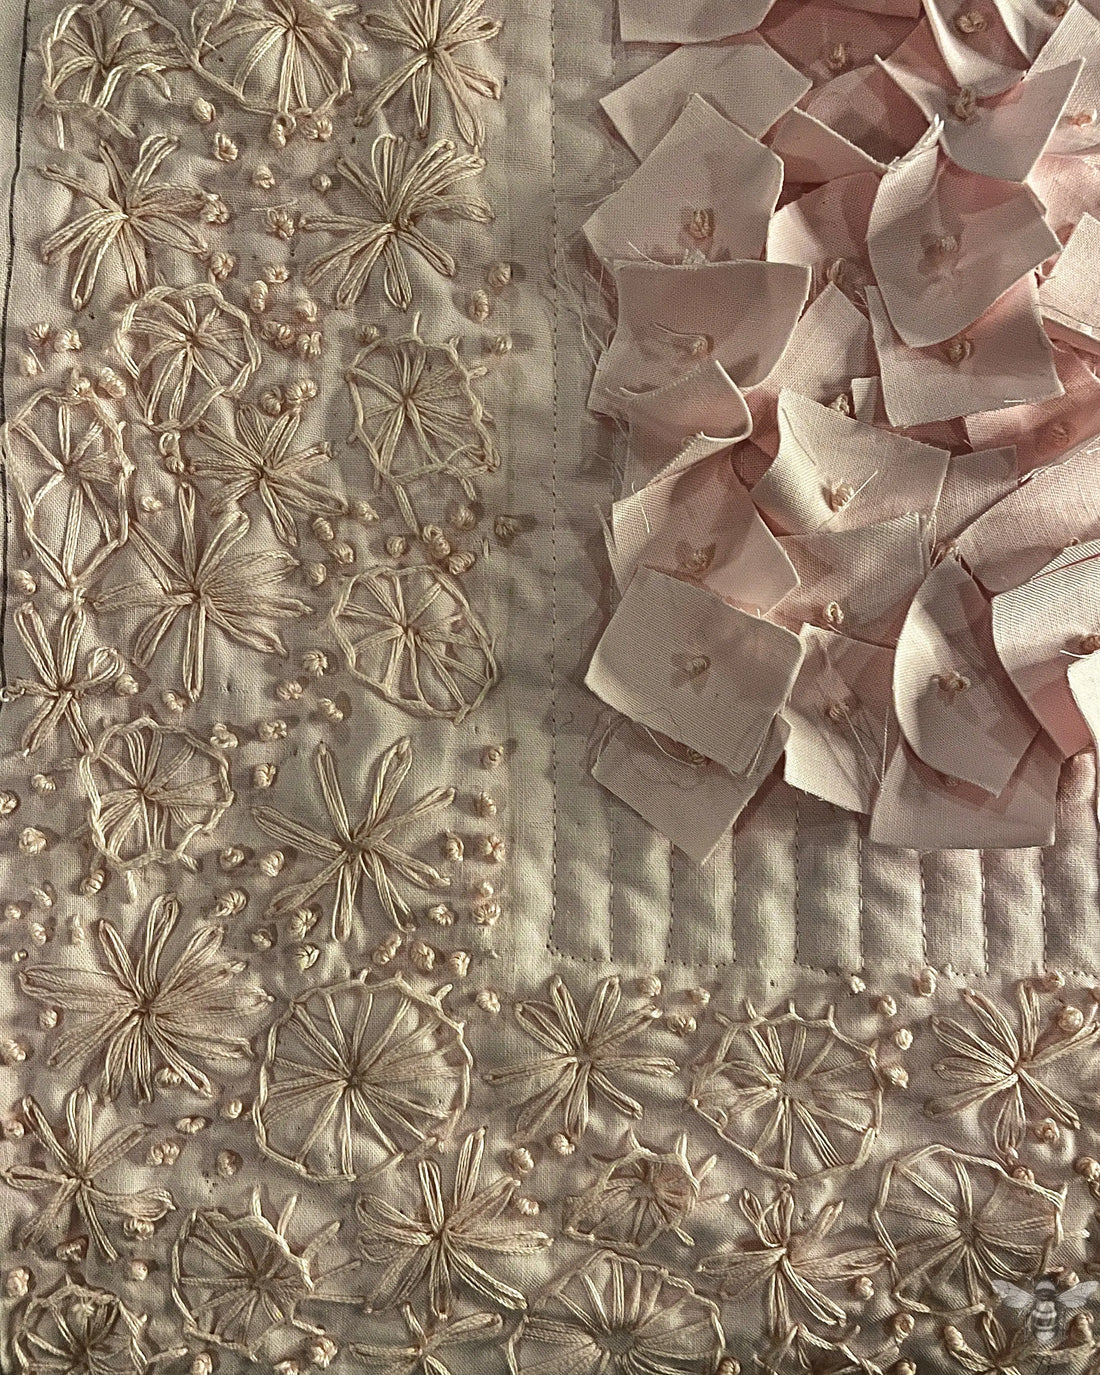 My Journey of Taking Big Risks in Quilting